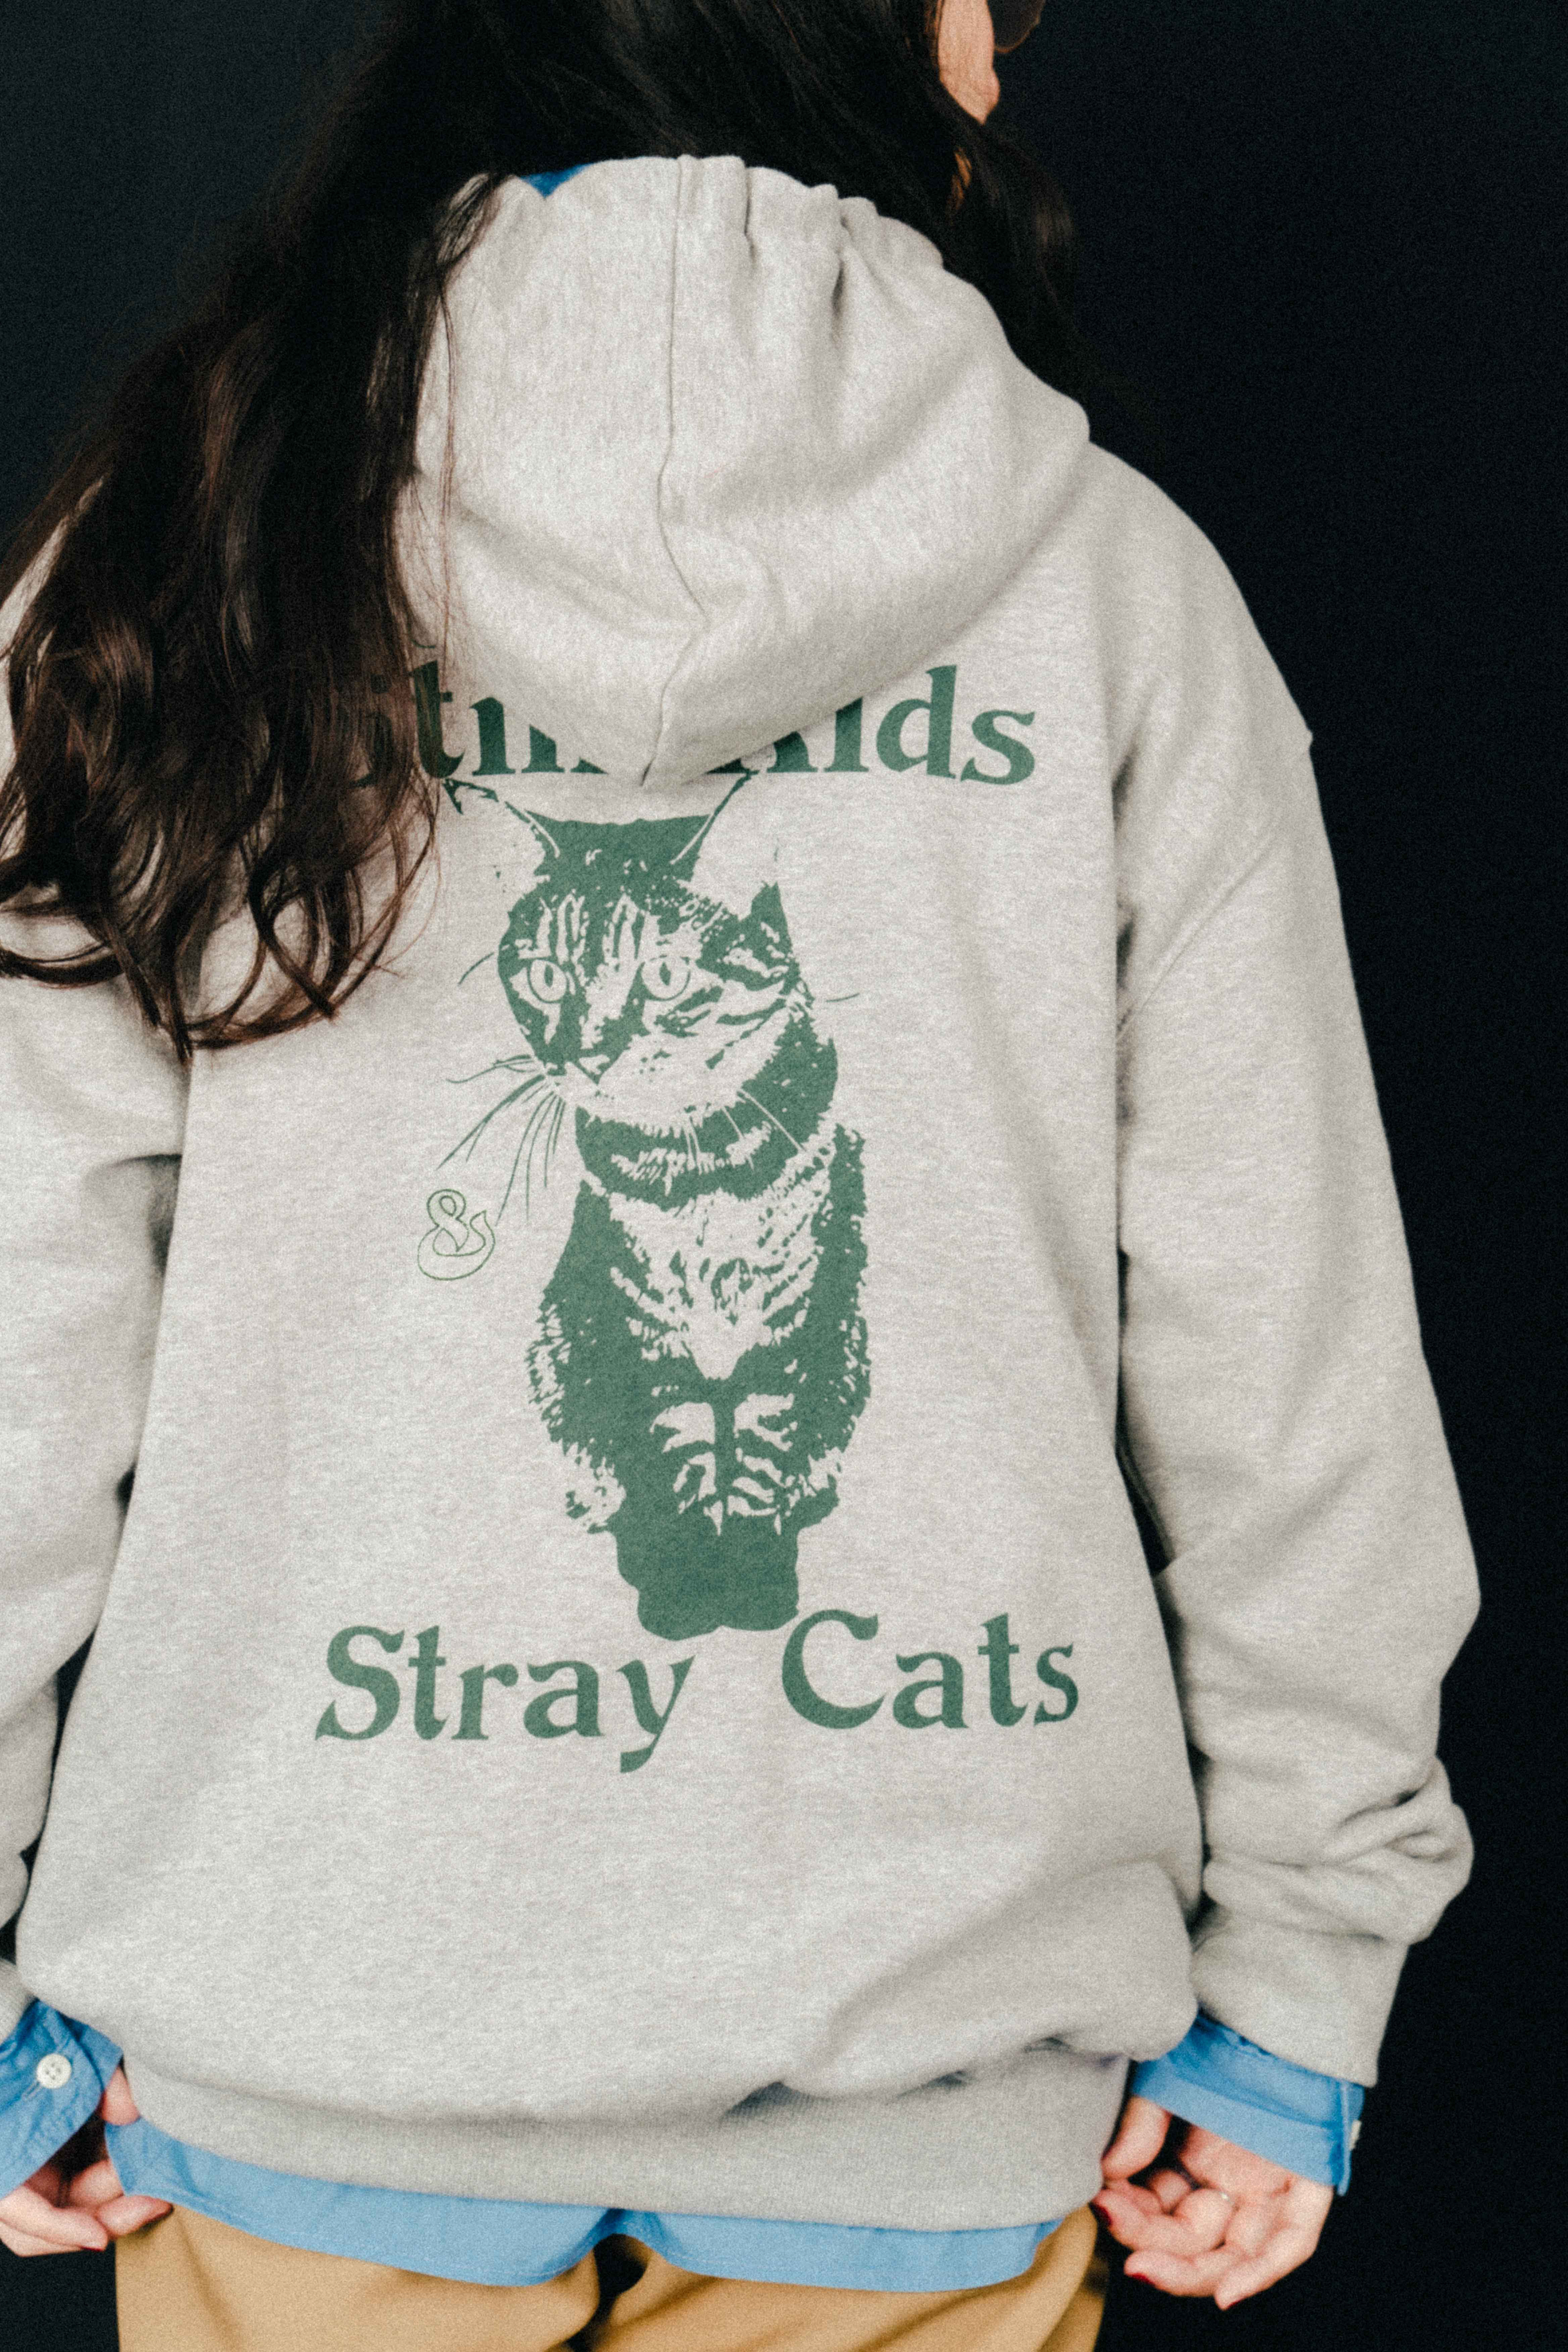 we are still kids & stray cats Hoodie (Green)